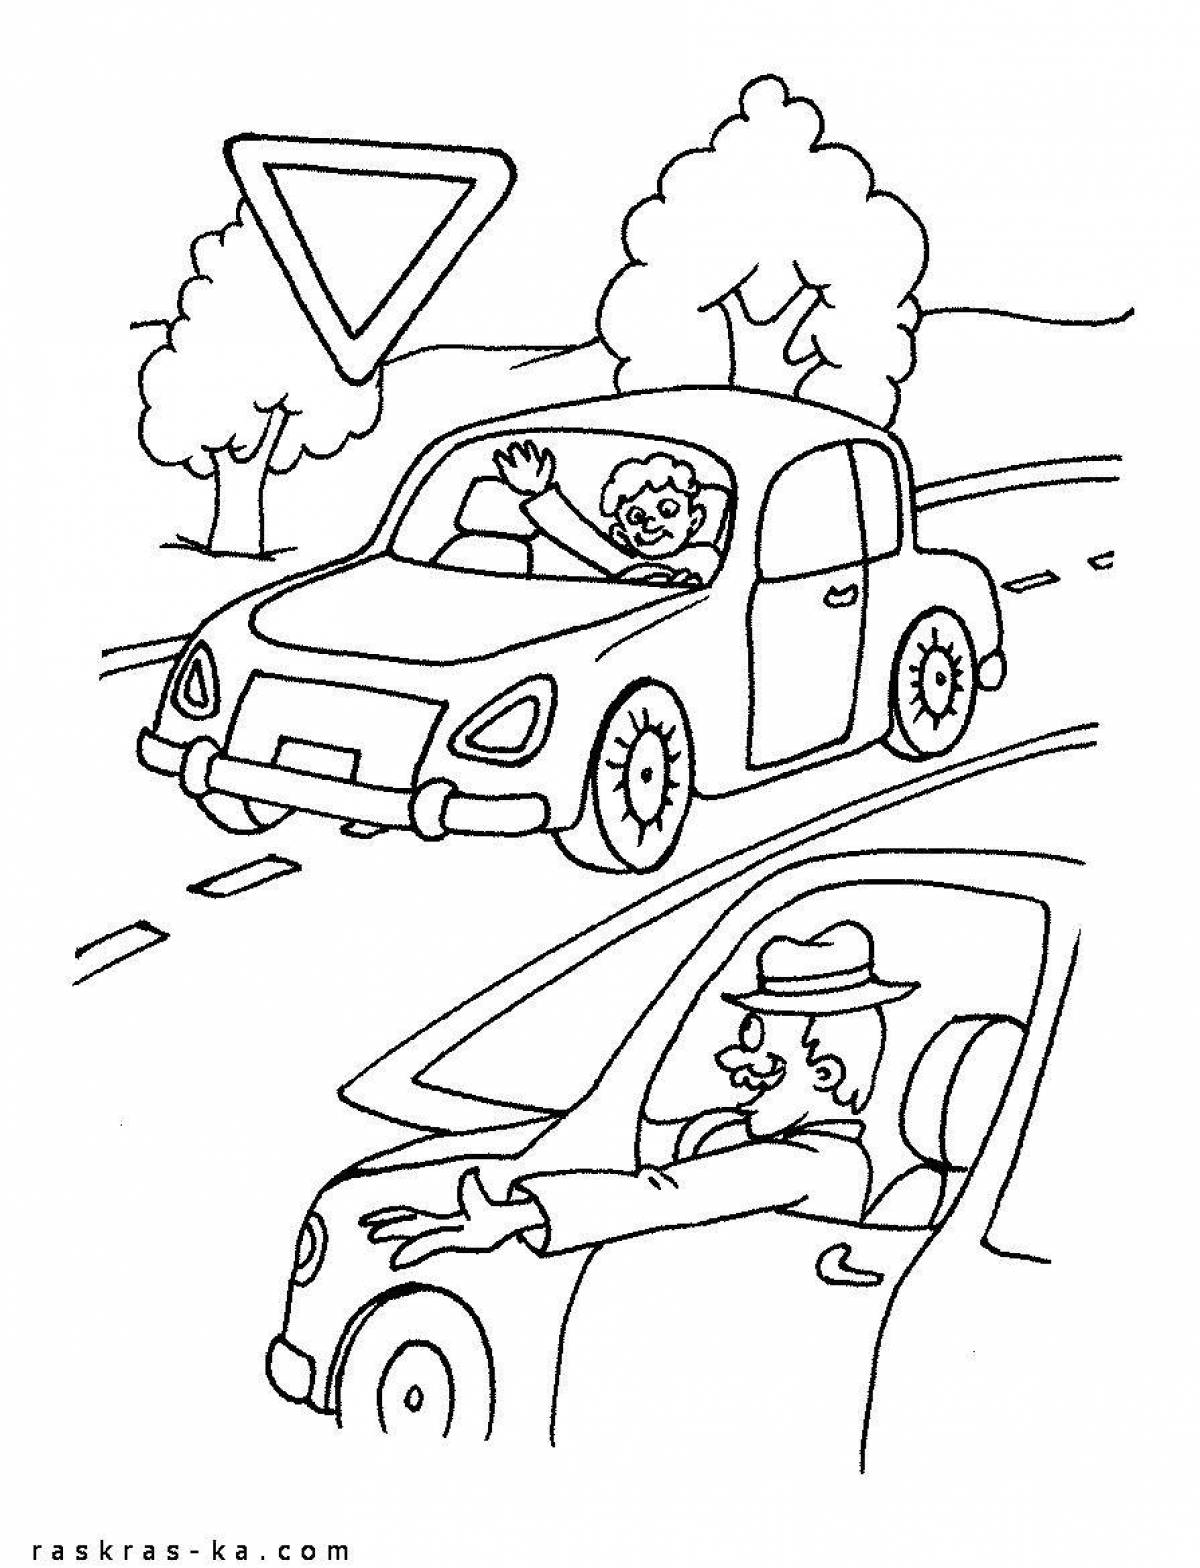 Entertaining coloring book traffic rules for preschoolers